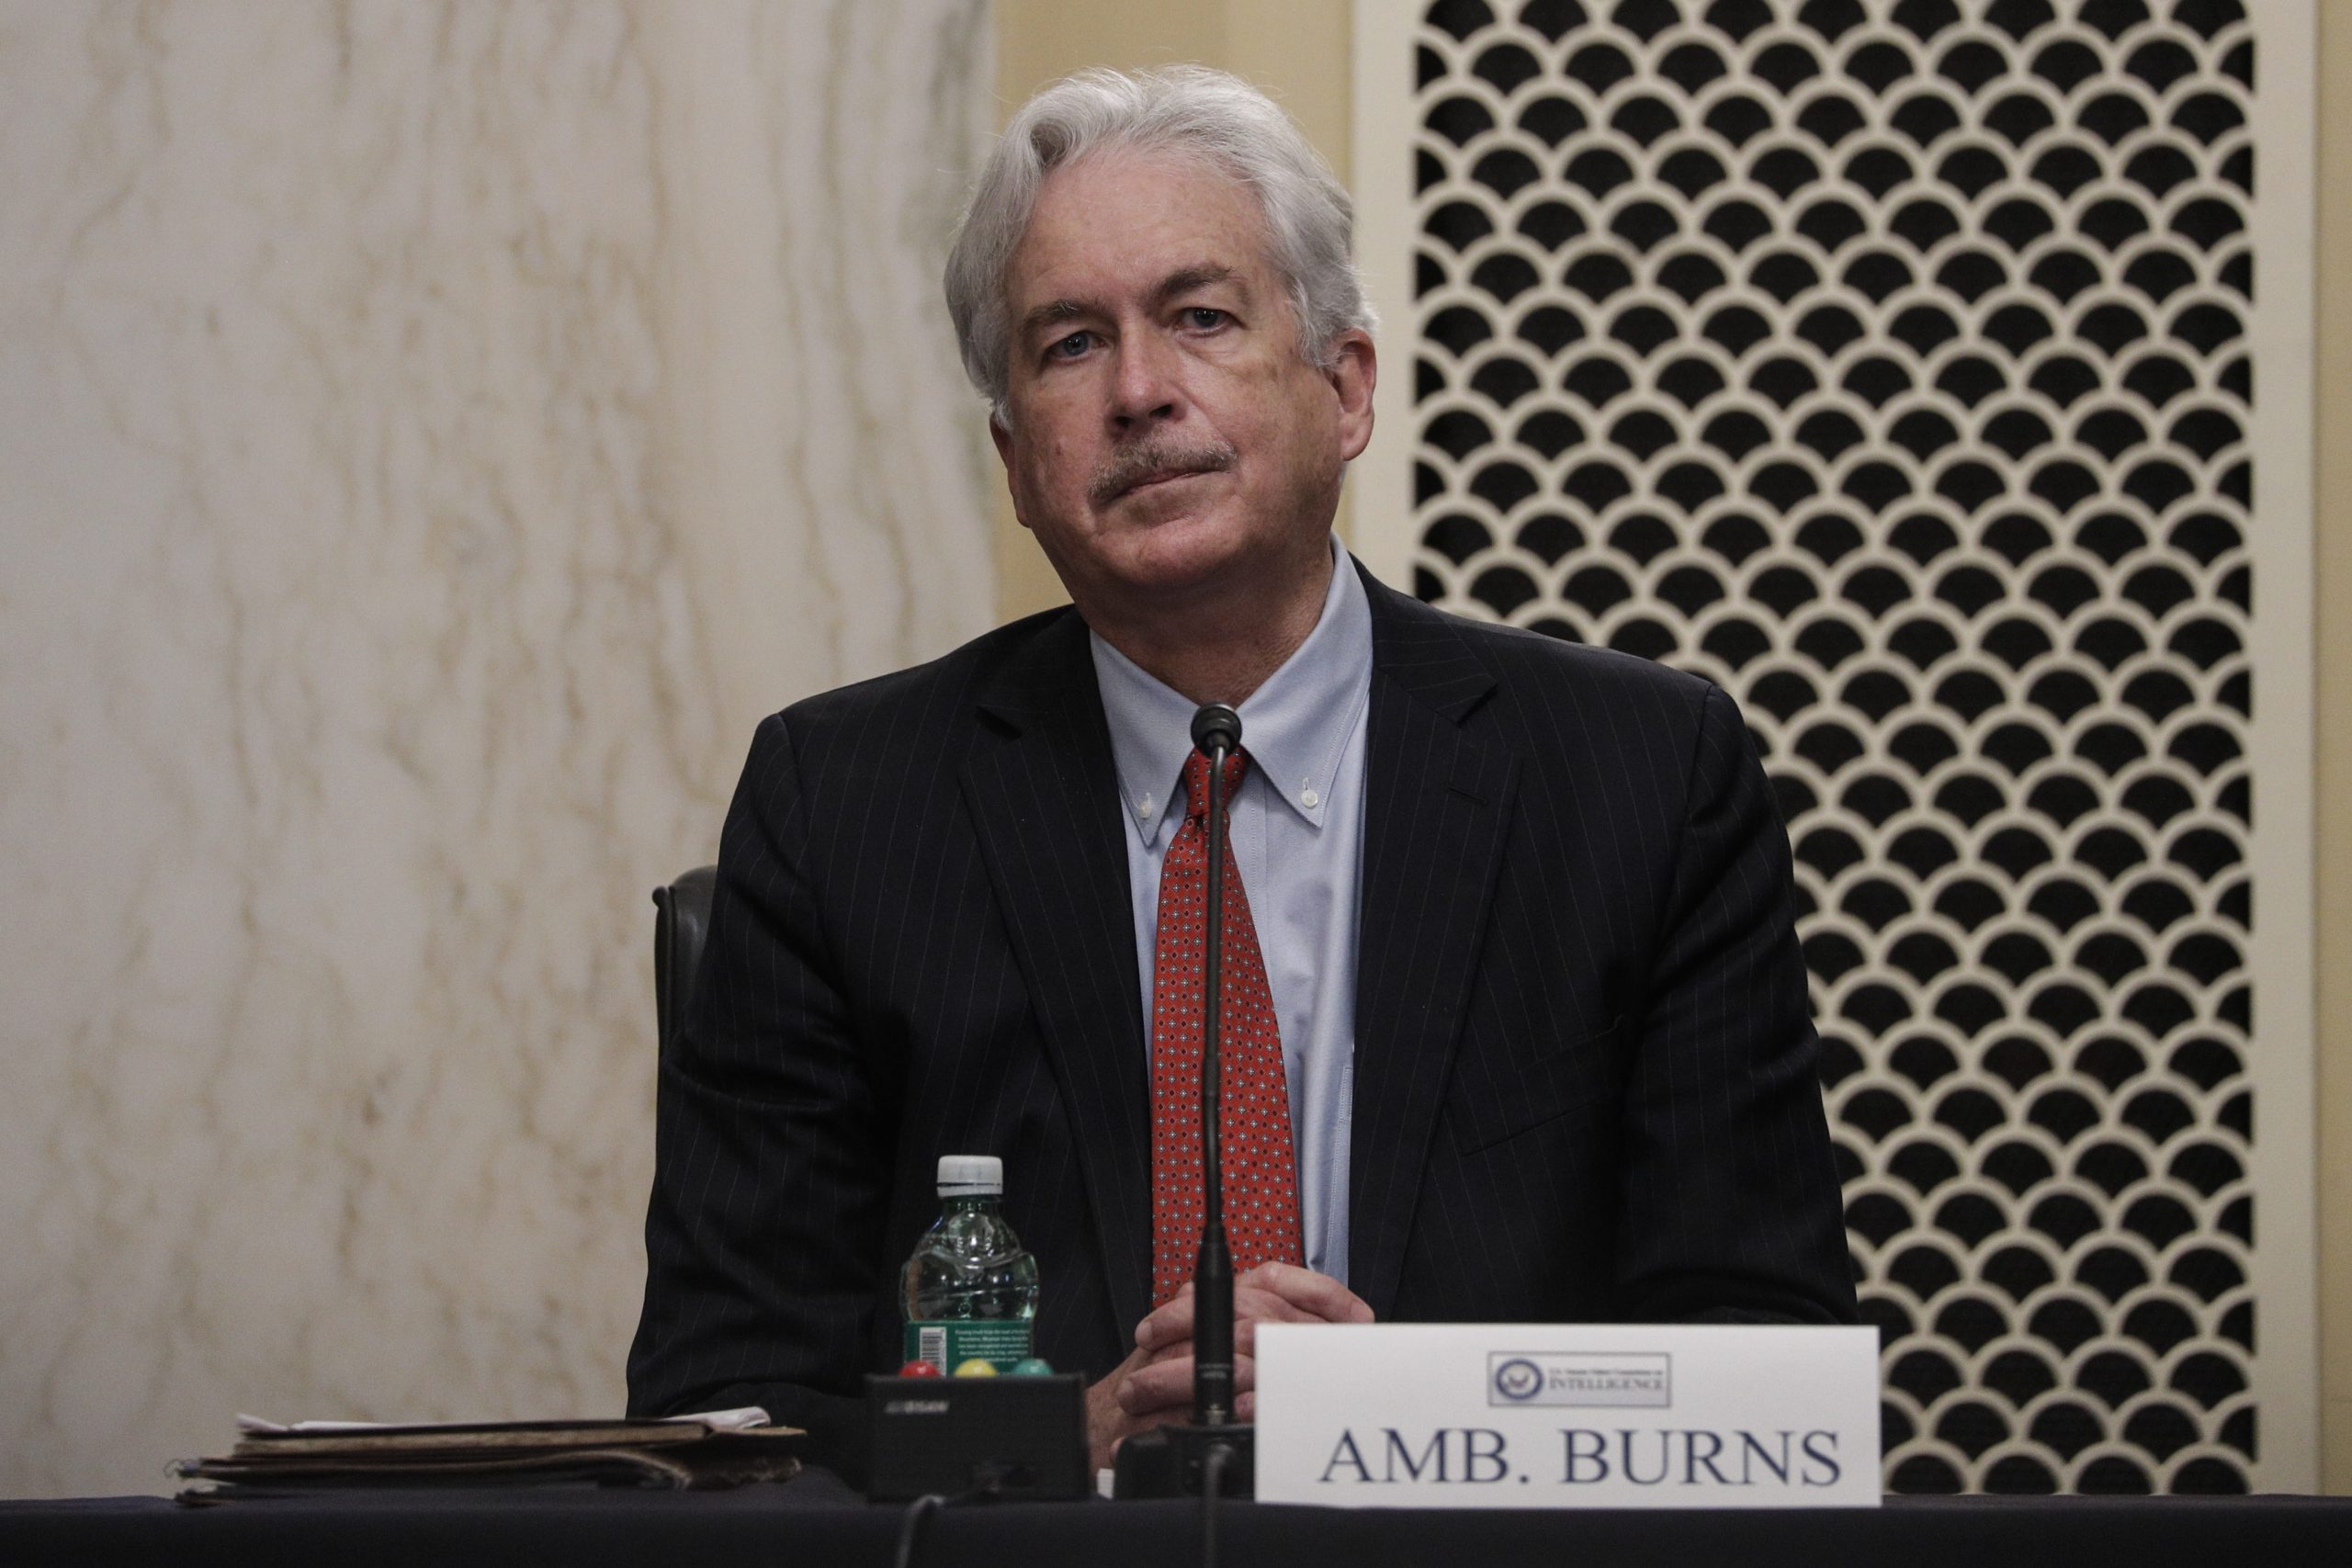 epa09033706 William Burns is seated to testify before a Senate Intelligence Committee hearing on his nomination to be director of the Central Intelligence Agency (CIA) on Capitol Hill in Washington, DC, USA, 24 February 2021.  EPA/TOM BRENNER / POOL